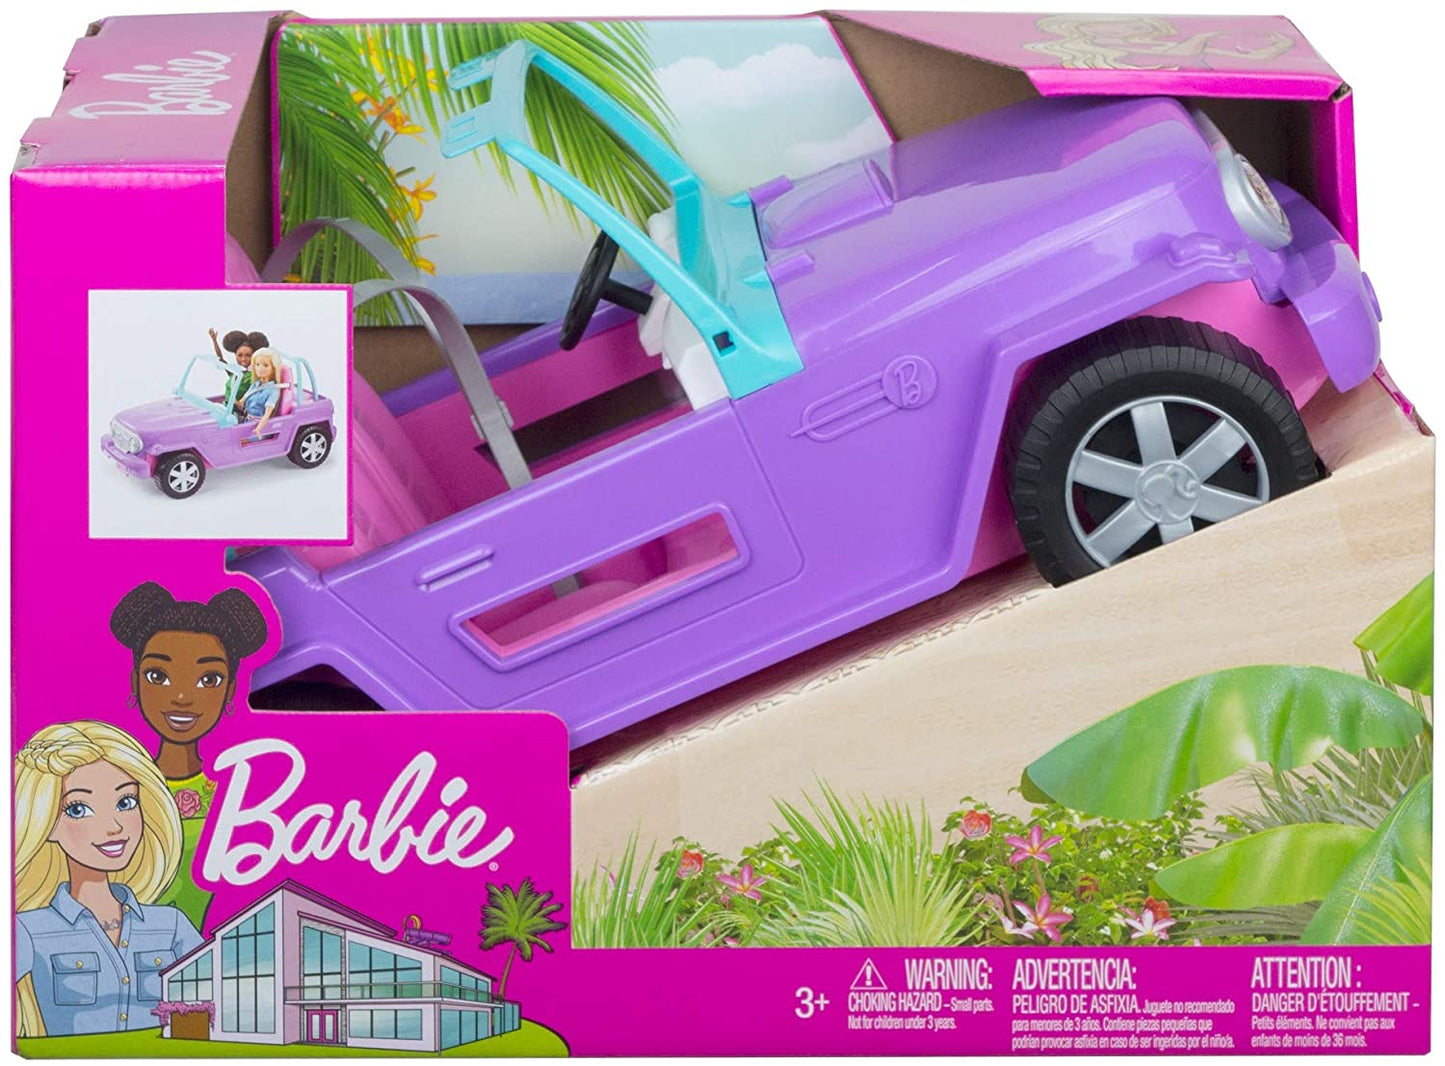 Barbie Off-Road Vehicle with Rolling Wheels - Girls RC Vehicle/Car Toy